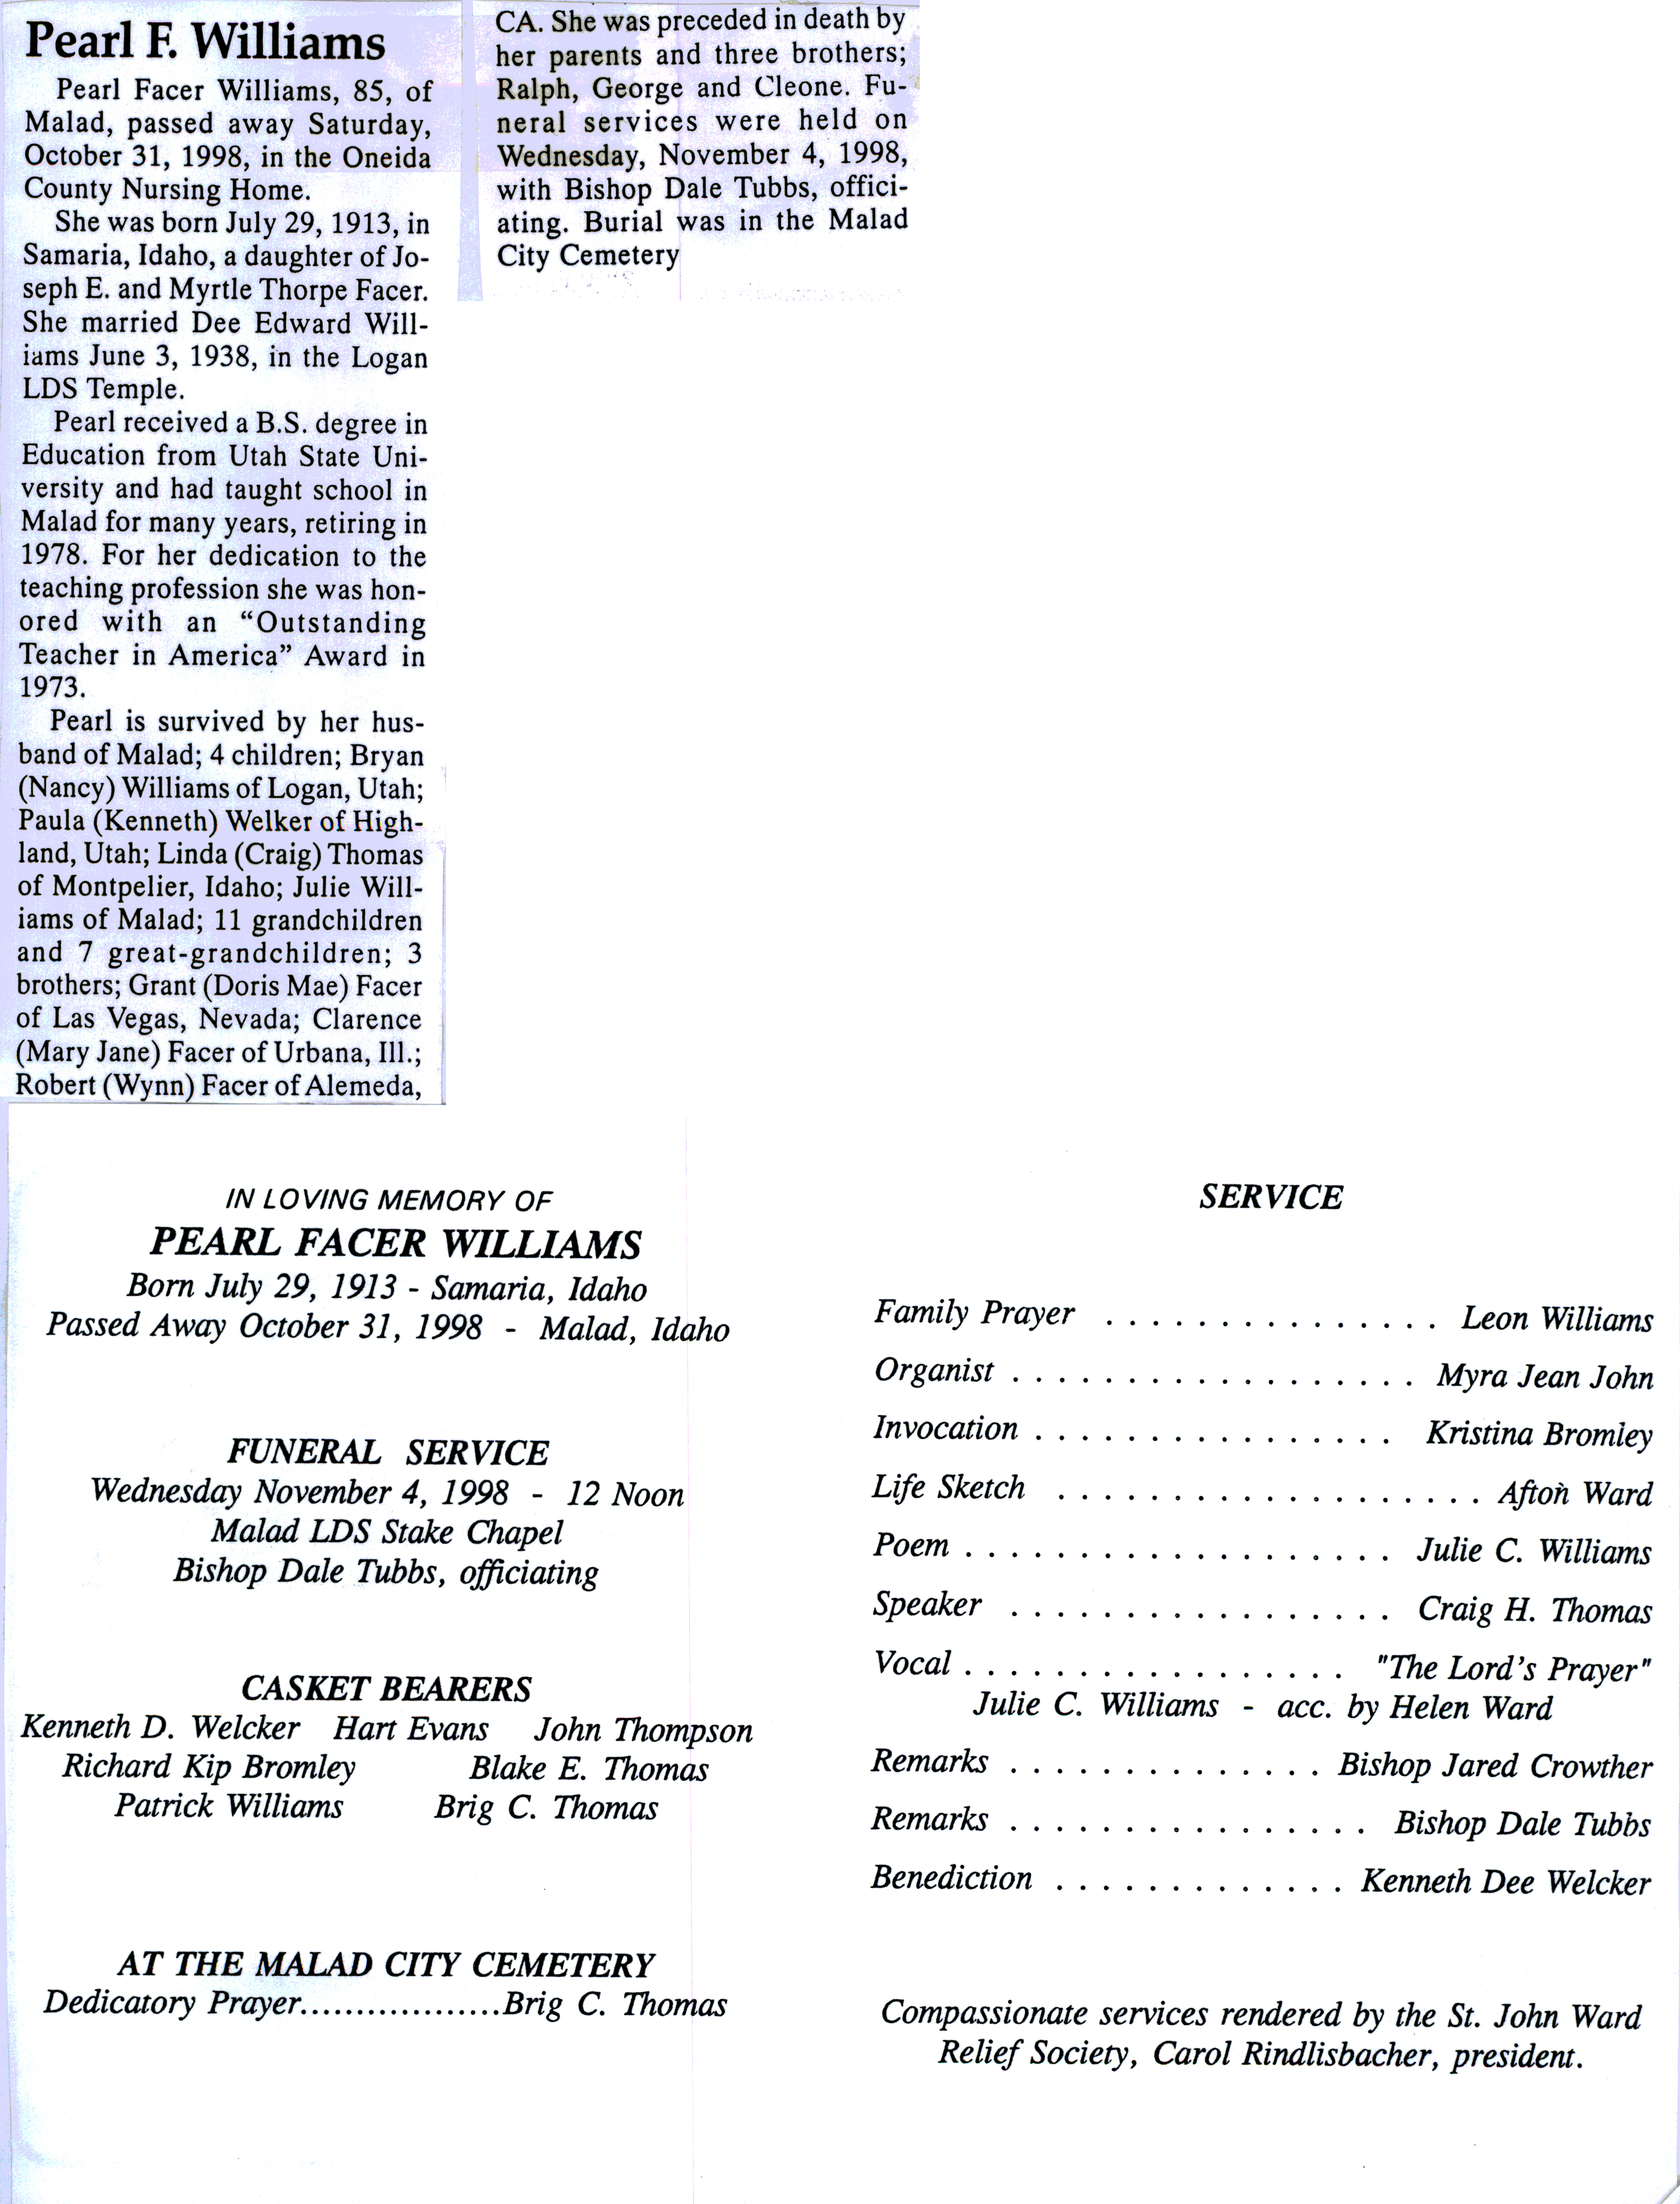 Pearl Facer Williams obit and program